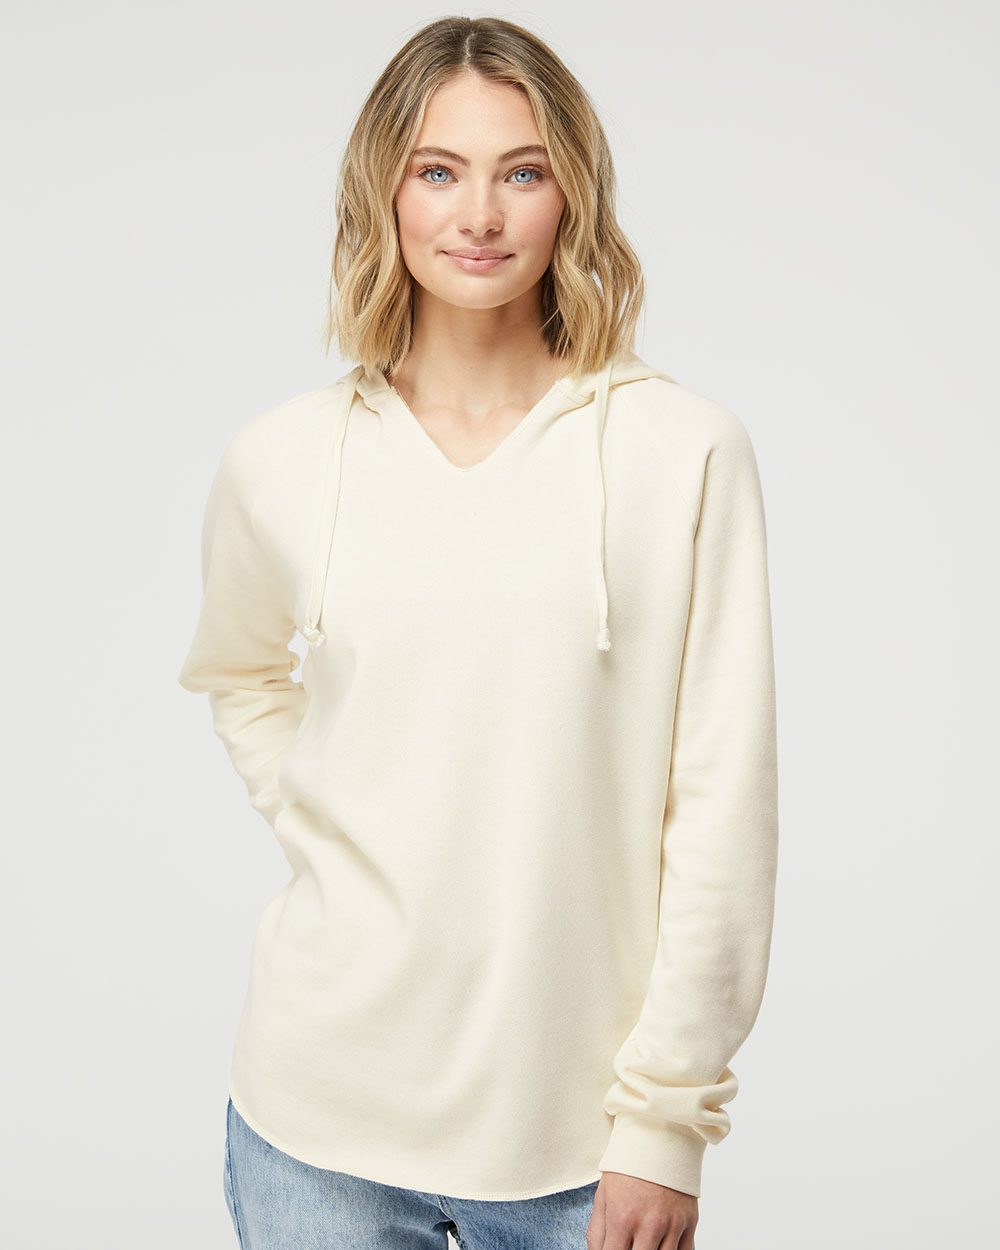 Women's Hooded Pullover